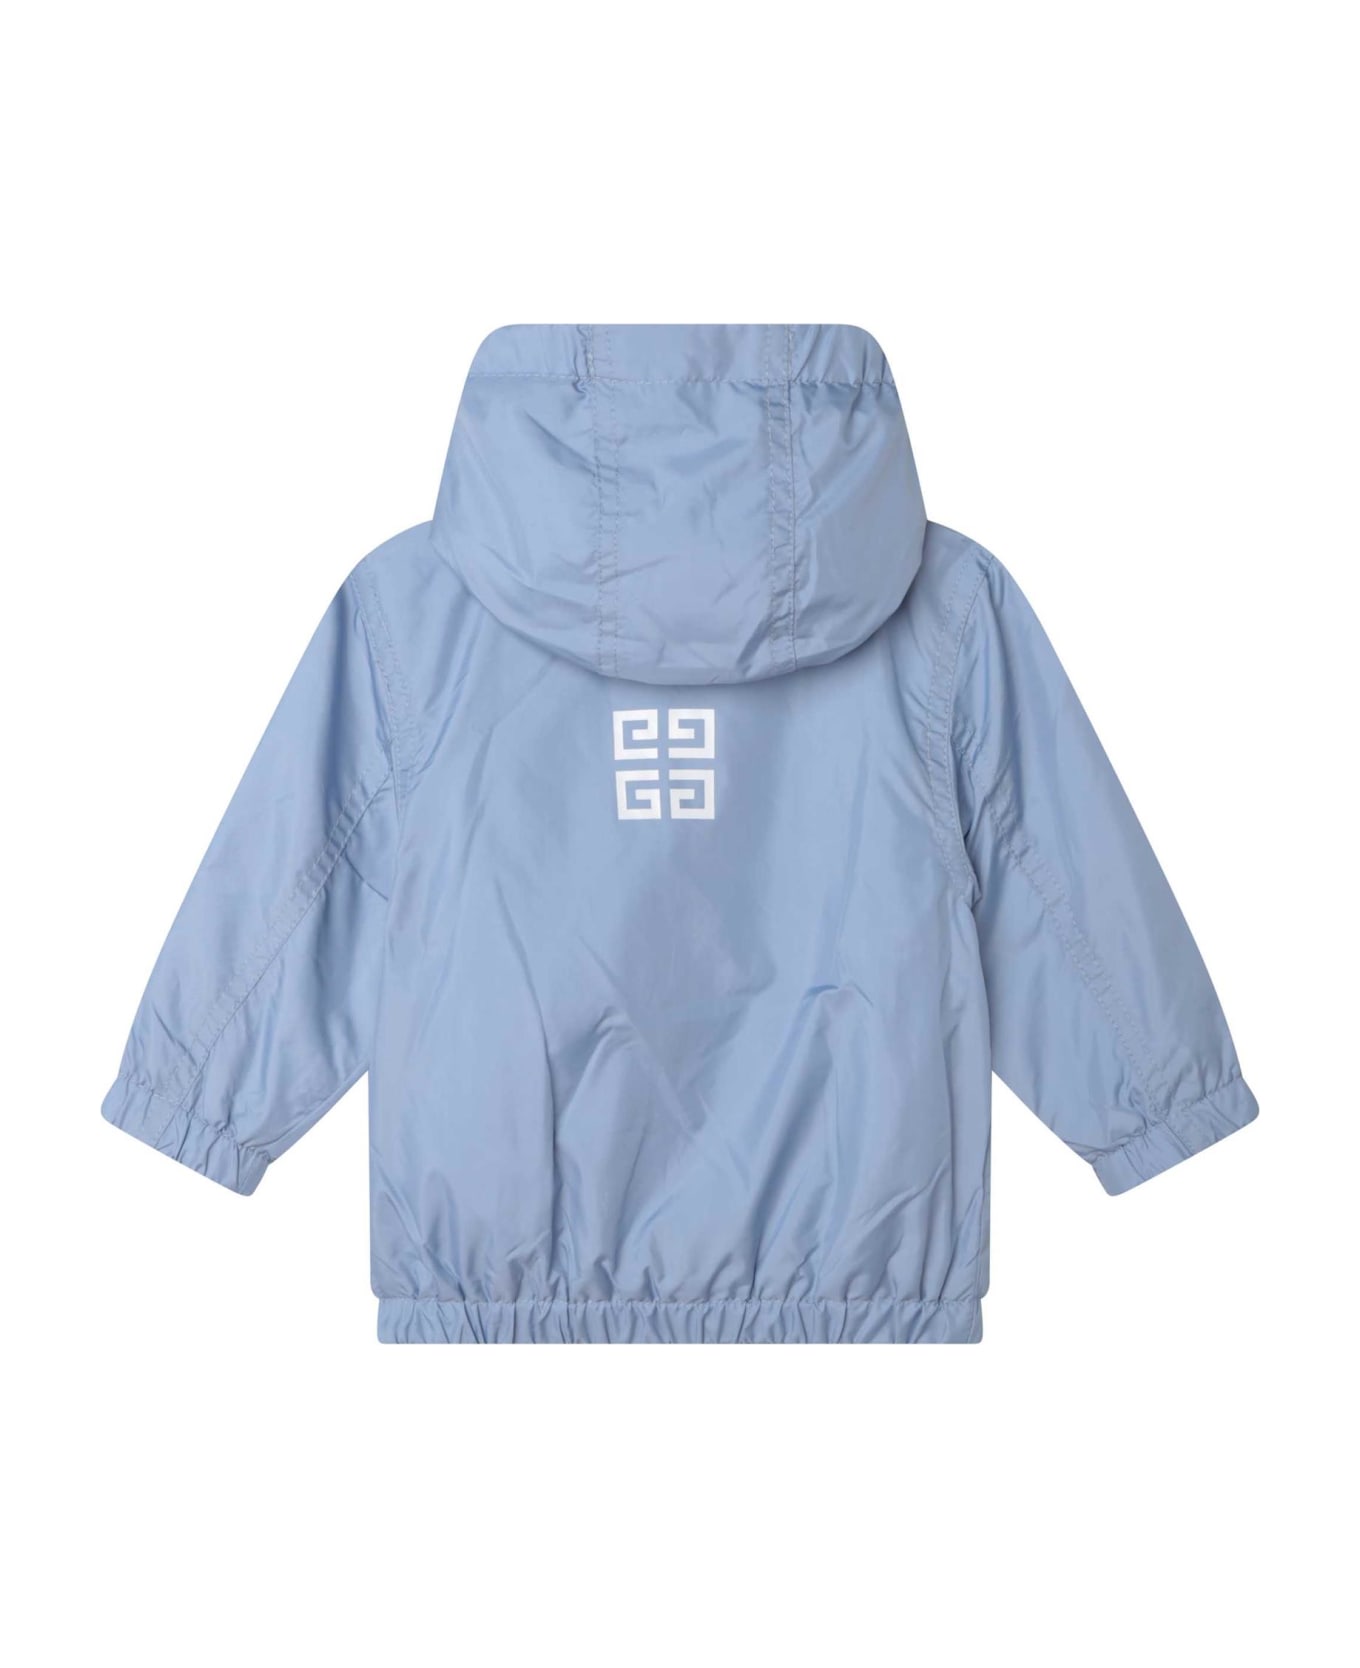 Givenchy Sweatshirt With Zip And Printed Logo - Blue